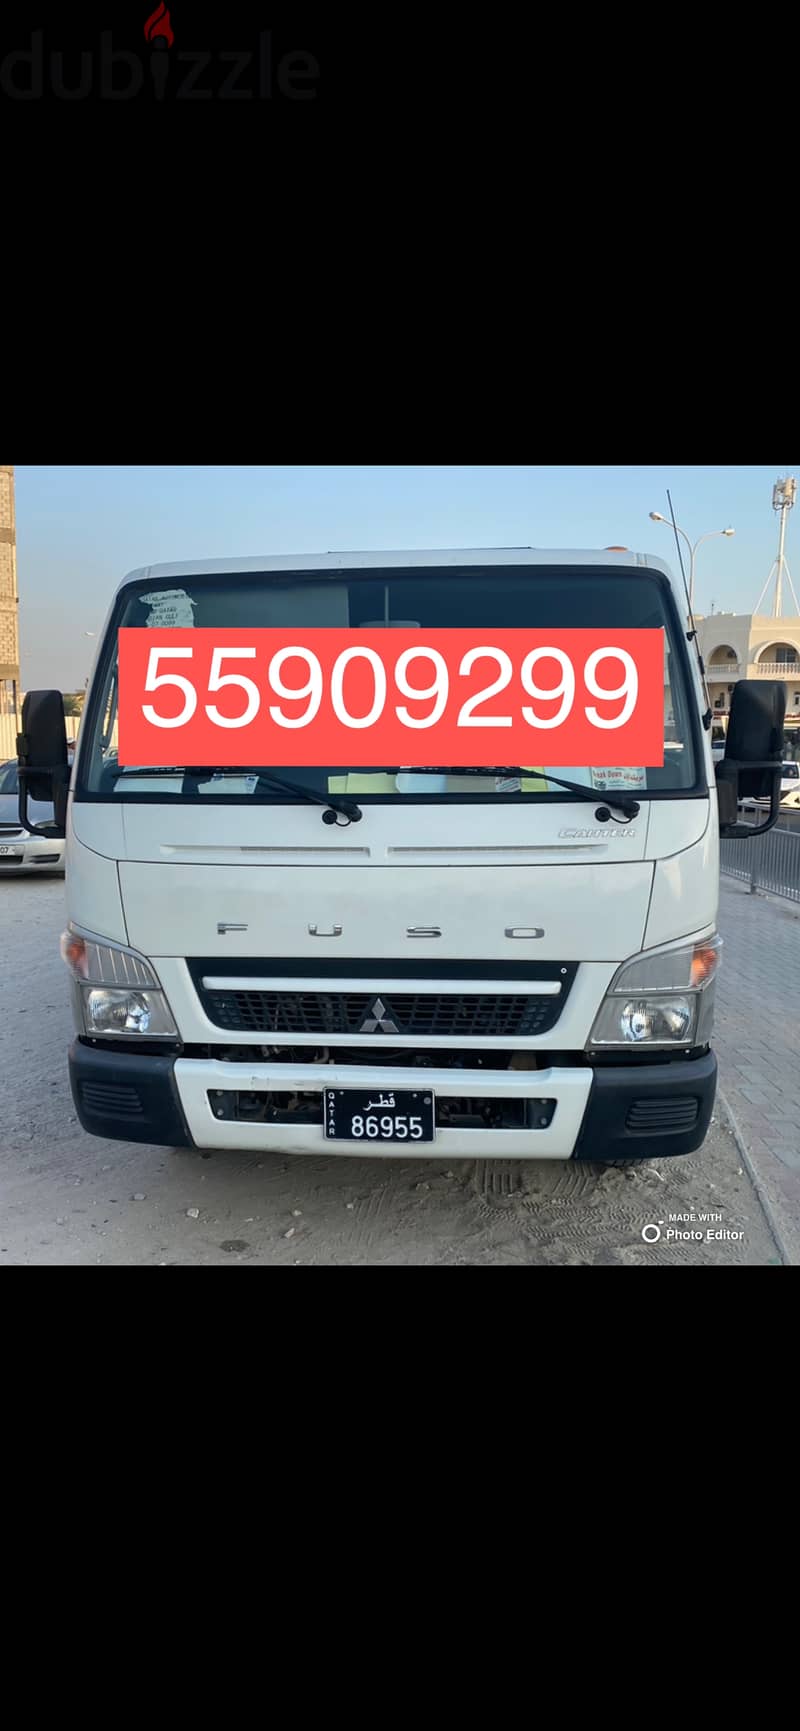 #Breakdown #Old #Airport 5590929 #Tow truck #Recovery#Matar#Qadeem 0